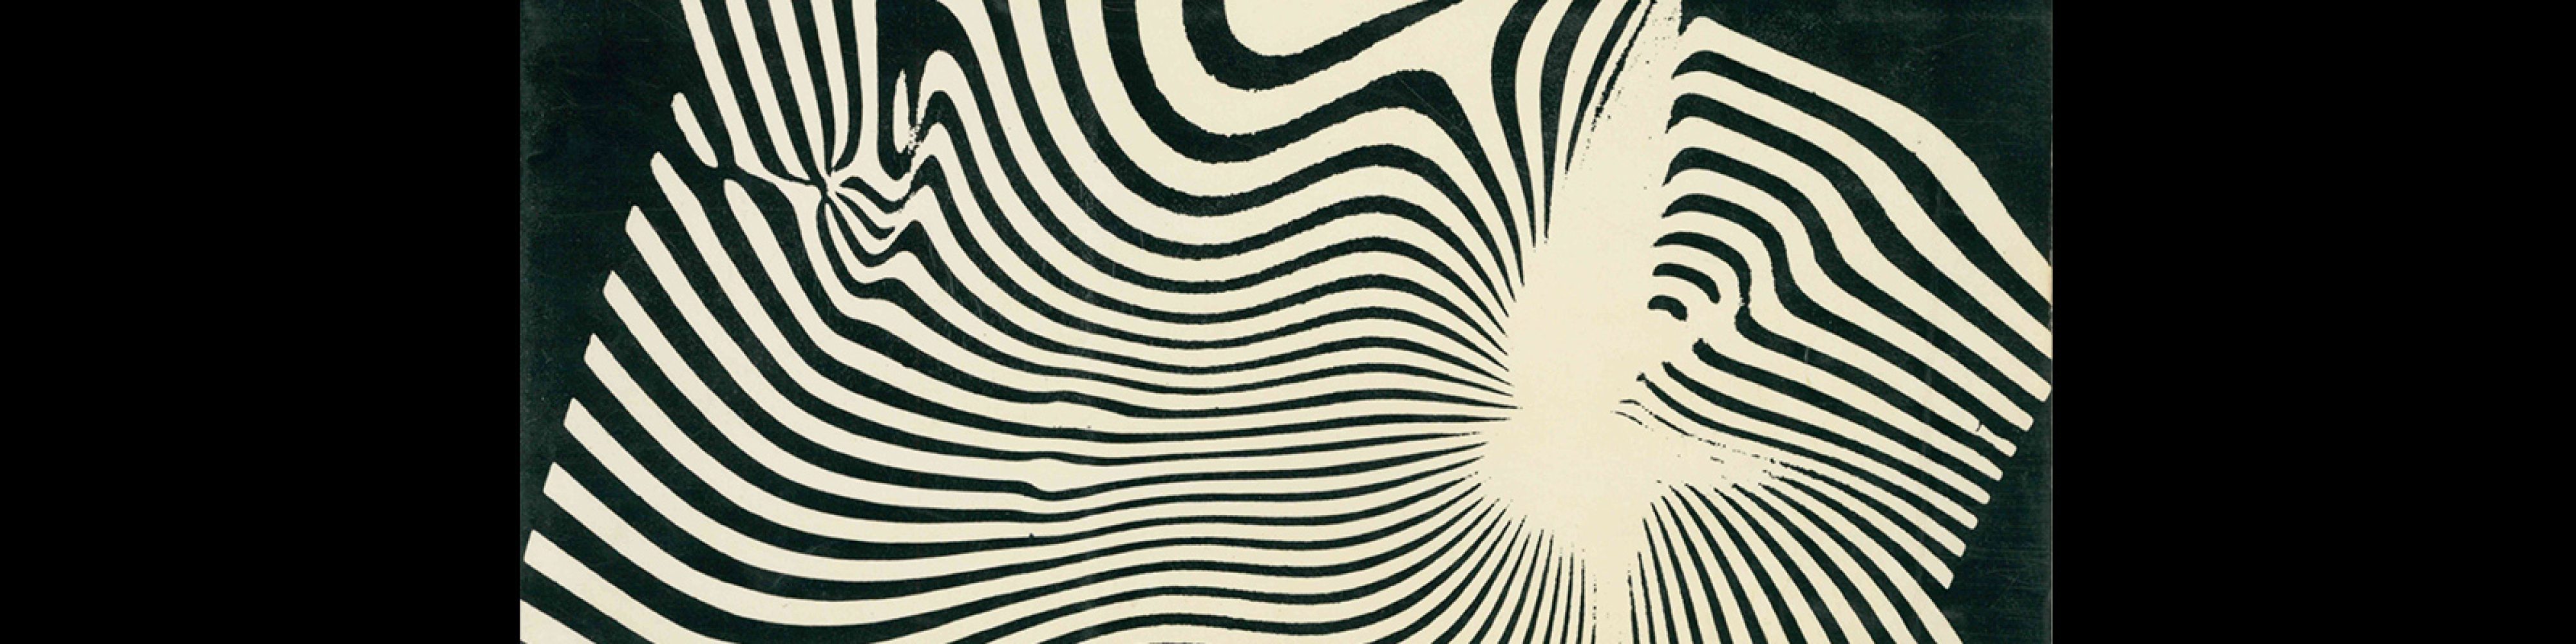 Graphis 108, 1963. Cover design by Franco Grignani.